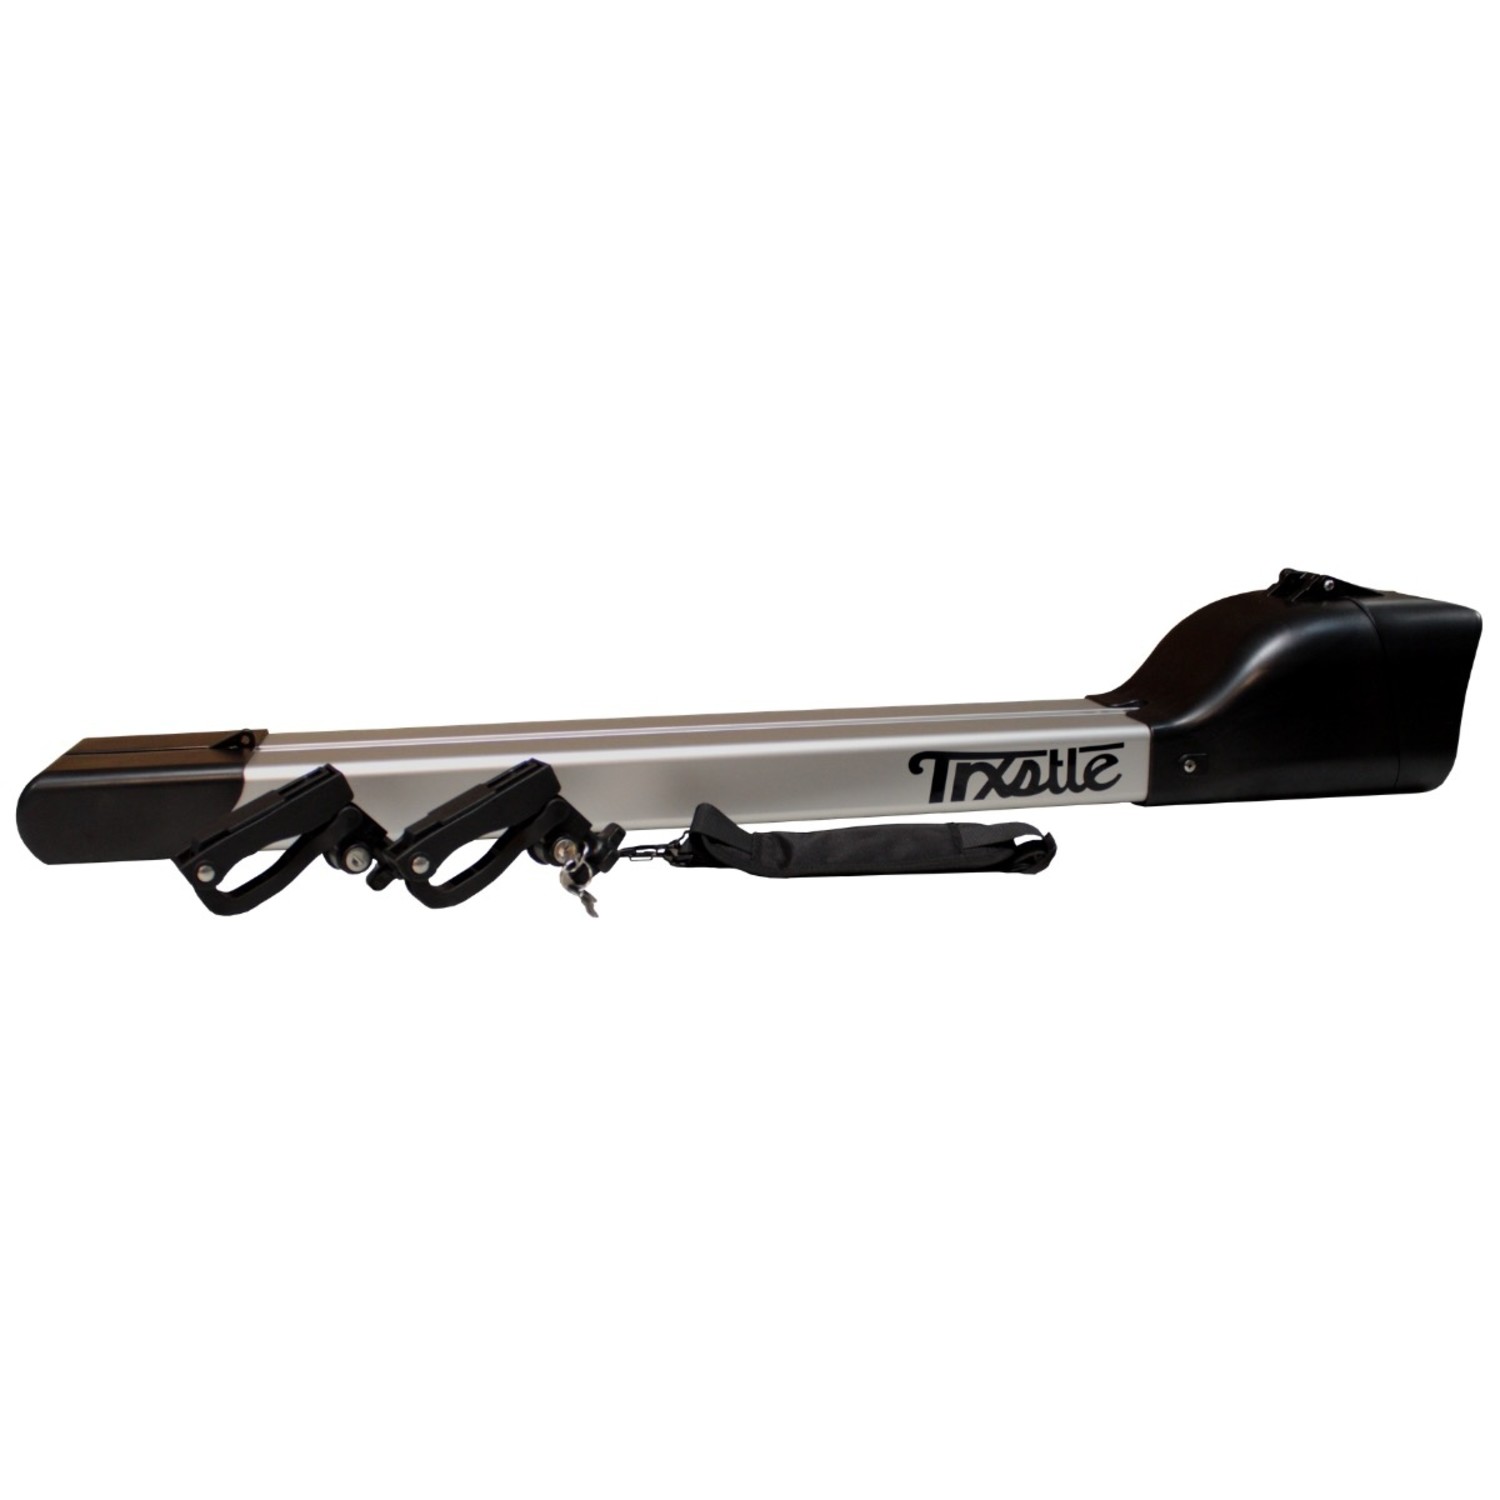 Trxstle CRC Dual Adjustable Fly Rod Carrier - Royal Treatment Fly Fishing